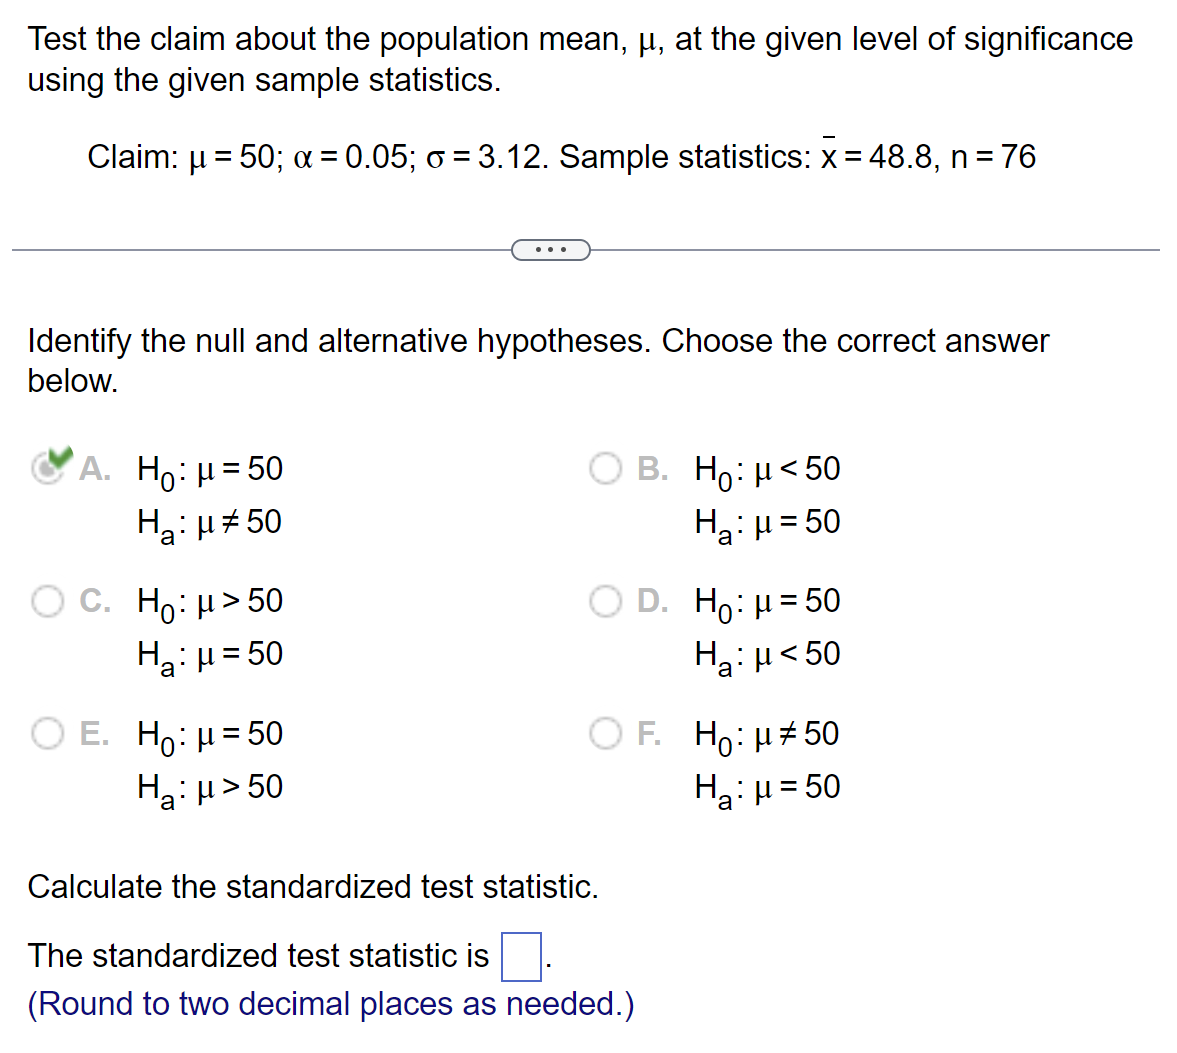 Test the claim about the population mean, µ, at the given level of significance
using the given sample statistics.
Claim: μ = 50; α = 0.05; à = 3.12. Sample statistics: x = 48.8, n = 76
Identify the null and alternative hypotheses. Choose the correct answer
below.
A. Ho: μ = 50
H₂: μ#50
a
O C. Ho: μ> 50
Ha: μ = 50
O E. Ho: μ = 50
H₂:μ>50
O B. Ho: μ<50
H₂: H=50
D. H₂: μ = 50
Hg:μ <50
OF. Ho: μ#50
H₂:μ=50
Calculate the standardized test statistic.
The standardized test statistic is
(Round to two decimal places as needed.)